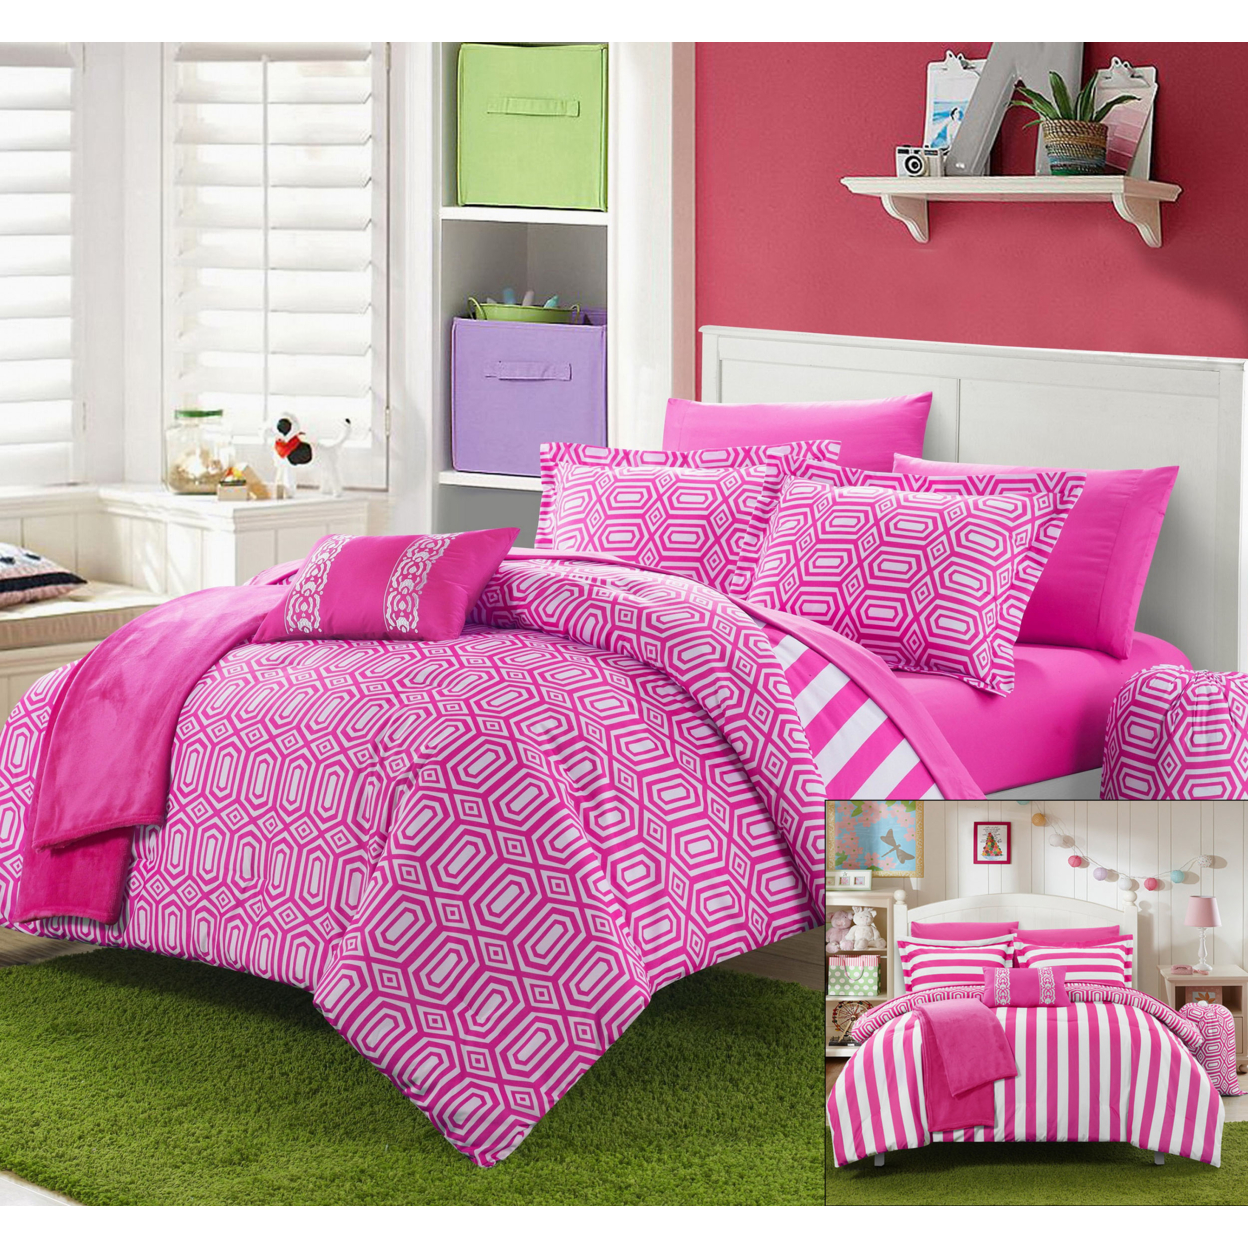 Chic Home 8/10 Piece Lyon Geometric And Striped Printed REVERSIBLE Comforter Set, Includes Sheets, Duffle Hamper And Fleece Throw - Fuchsia,